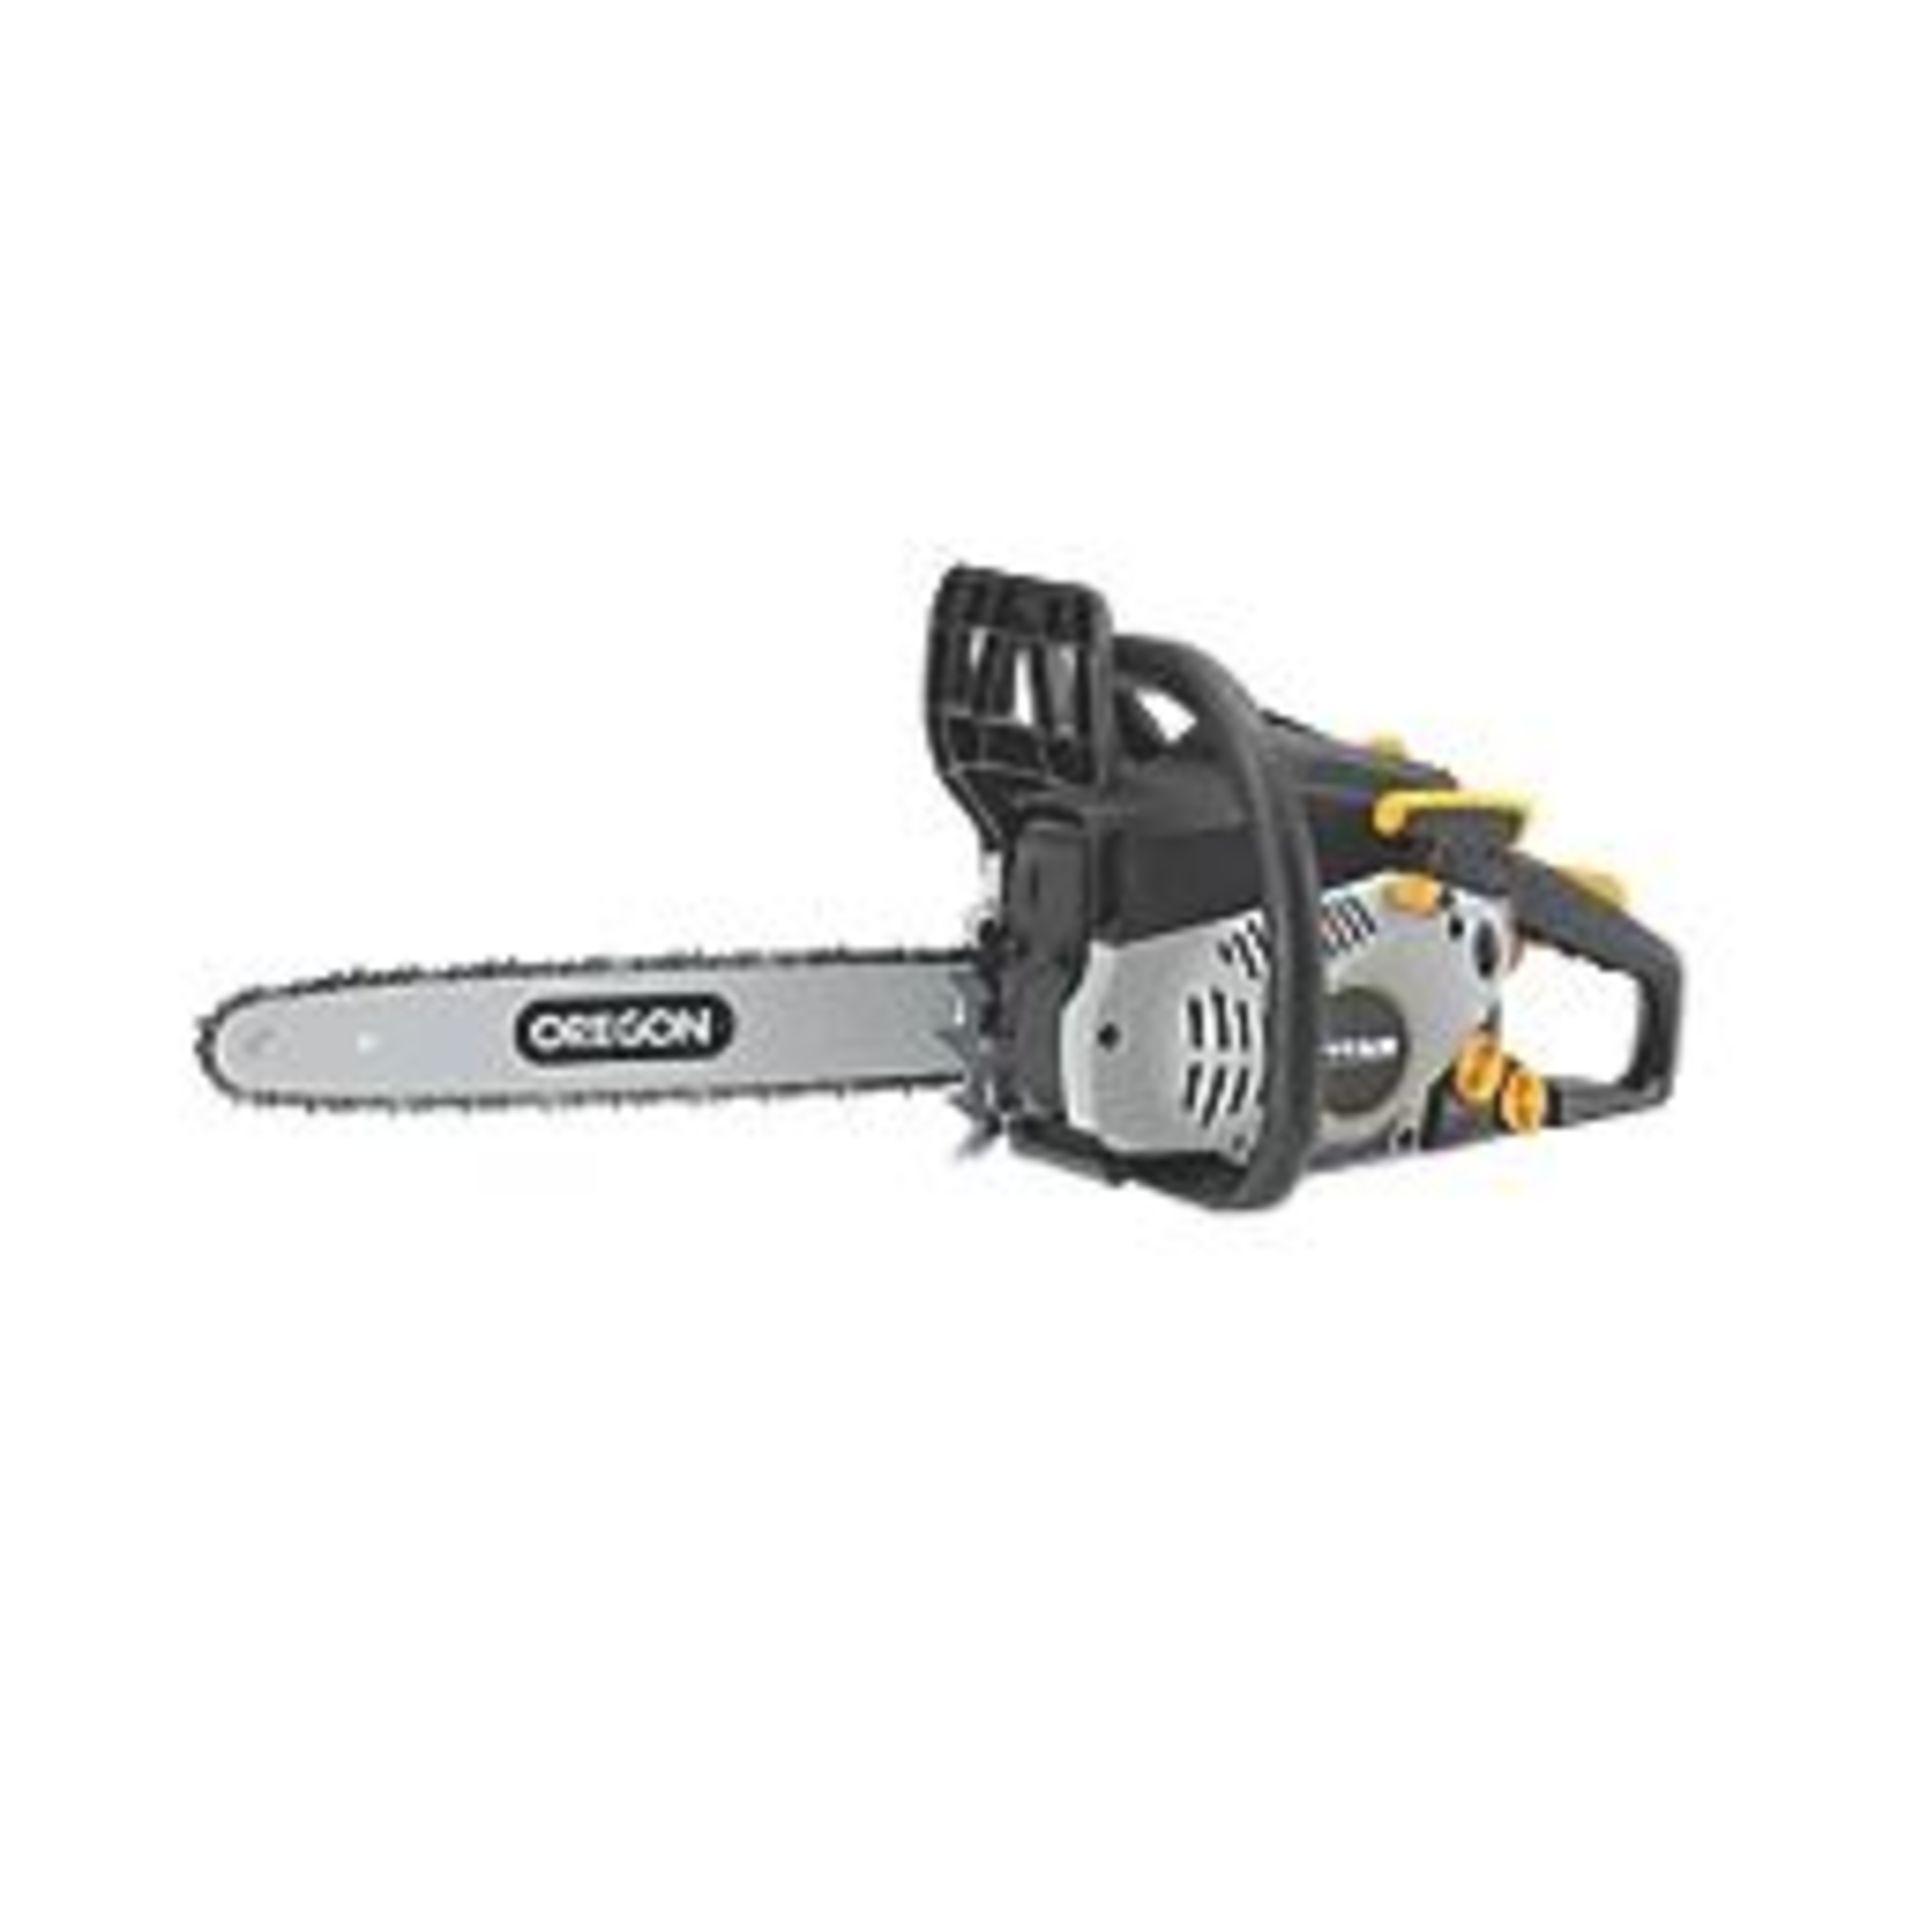 TITAN TTCSP40 40CM 40.1CC CHAINSAW. - R13a.10. Lightweight and agile chainsaw designed for